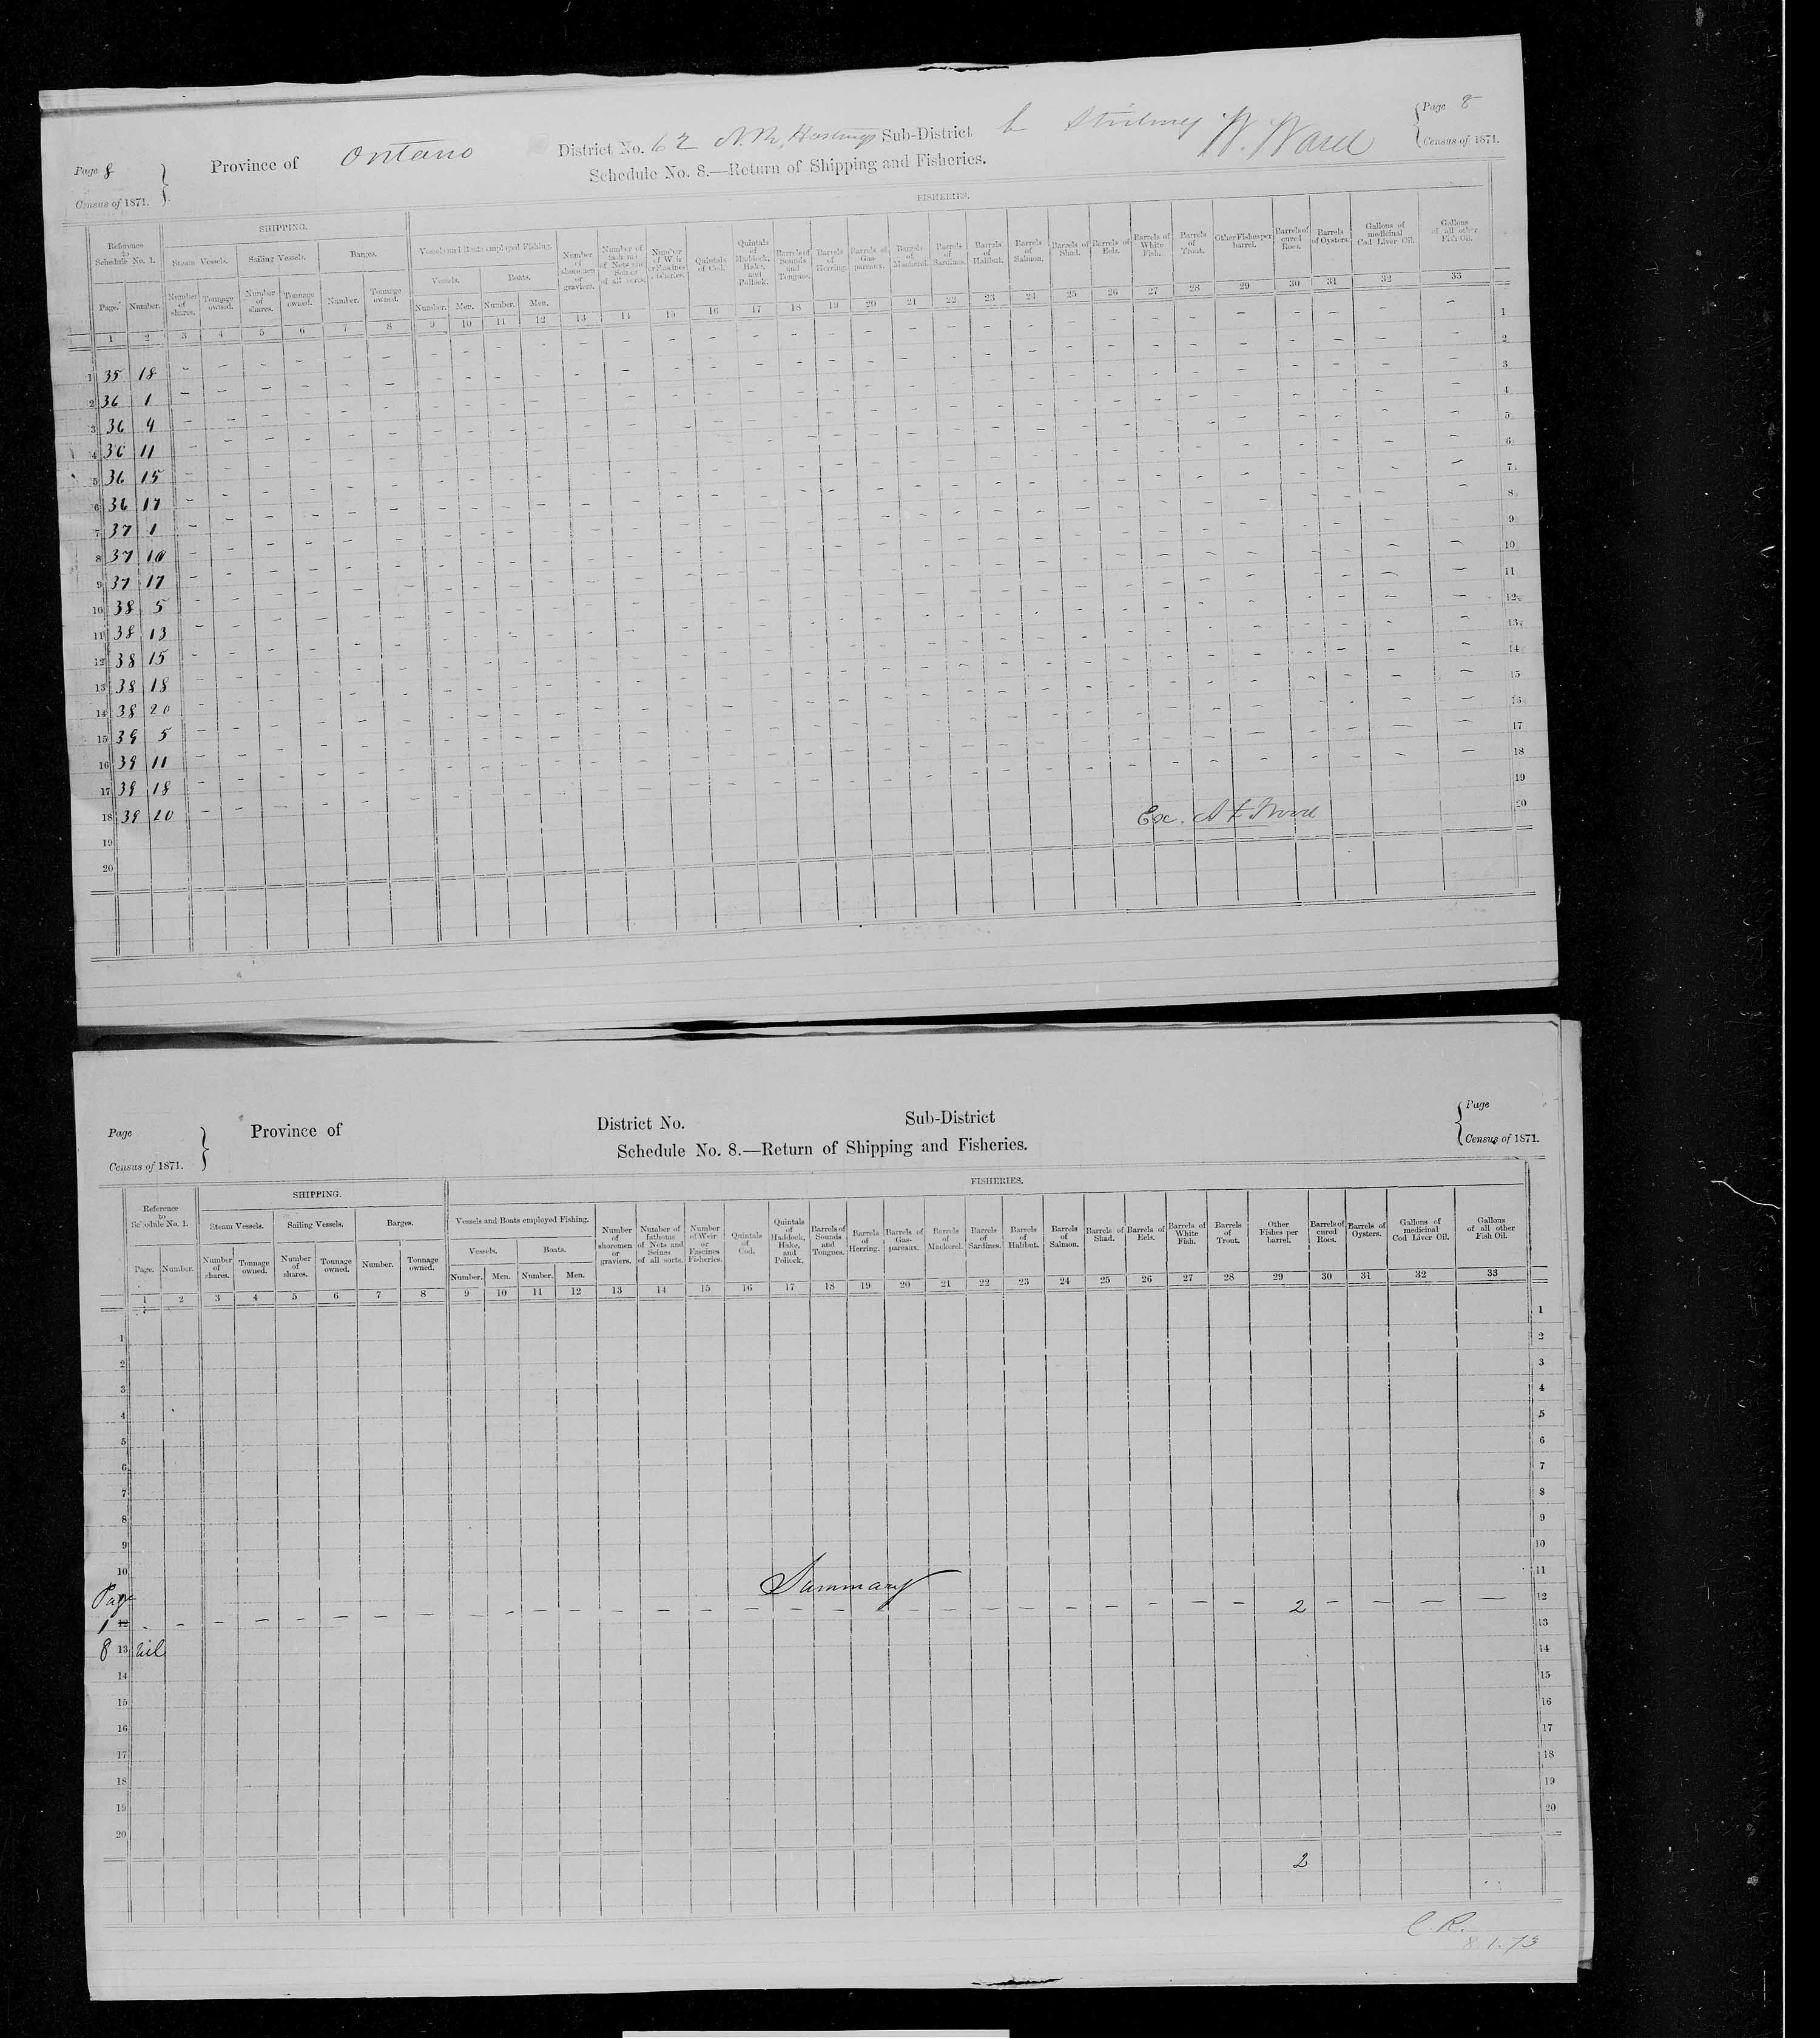 Title: Census of Canada, 1871 - Mikan Number: 142105 - Microform: c-9993